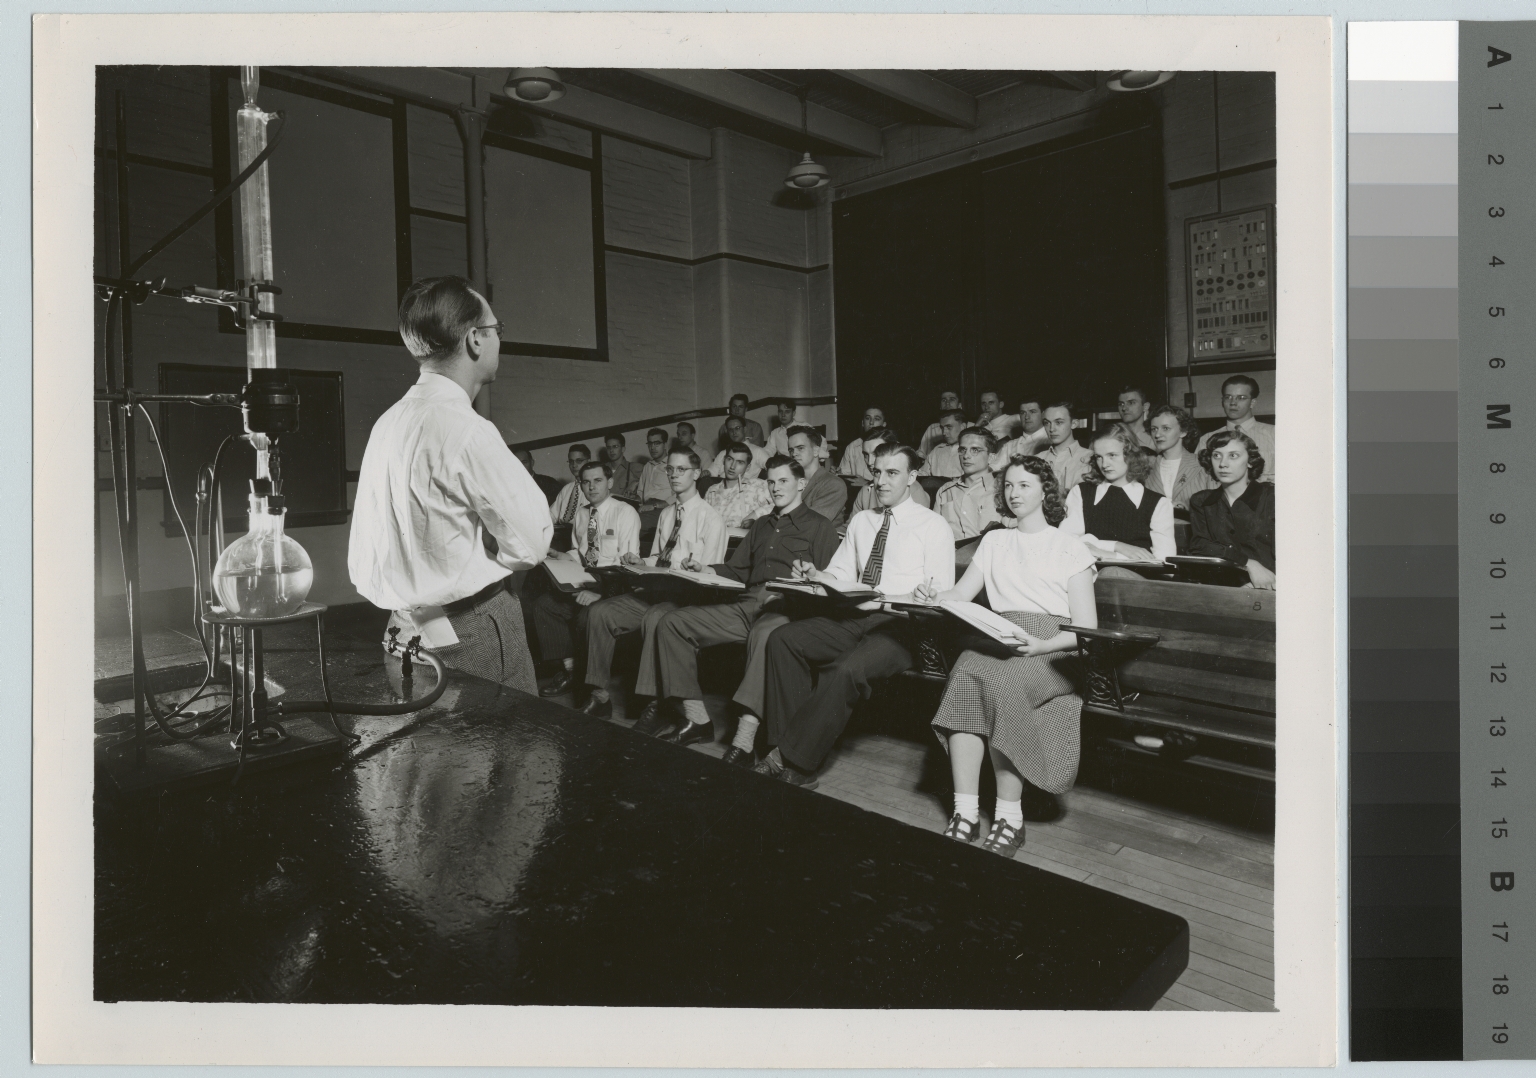 Academics, chemistry, Rochester Institute of Technology chemistry class with the instructor James Wilson, 1950